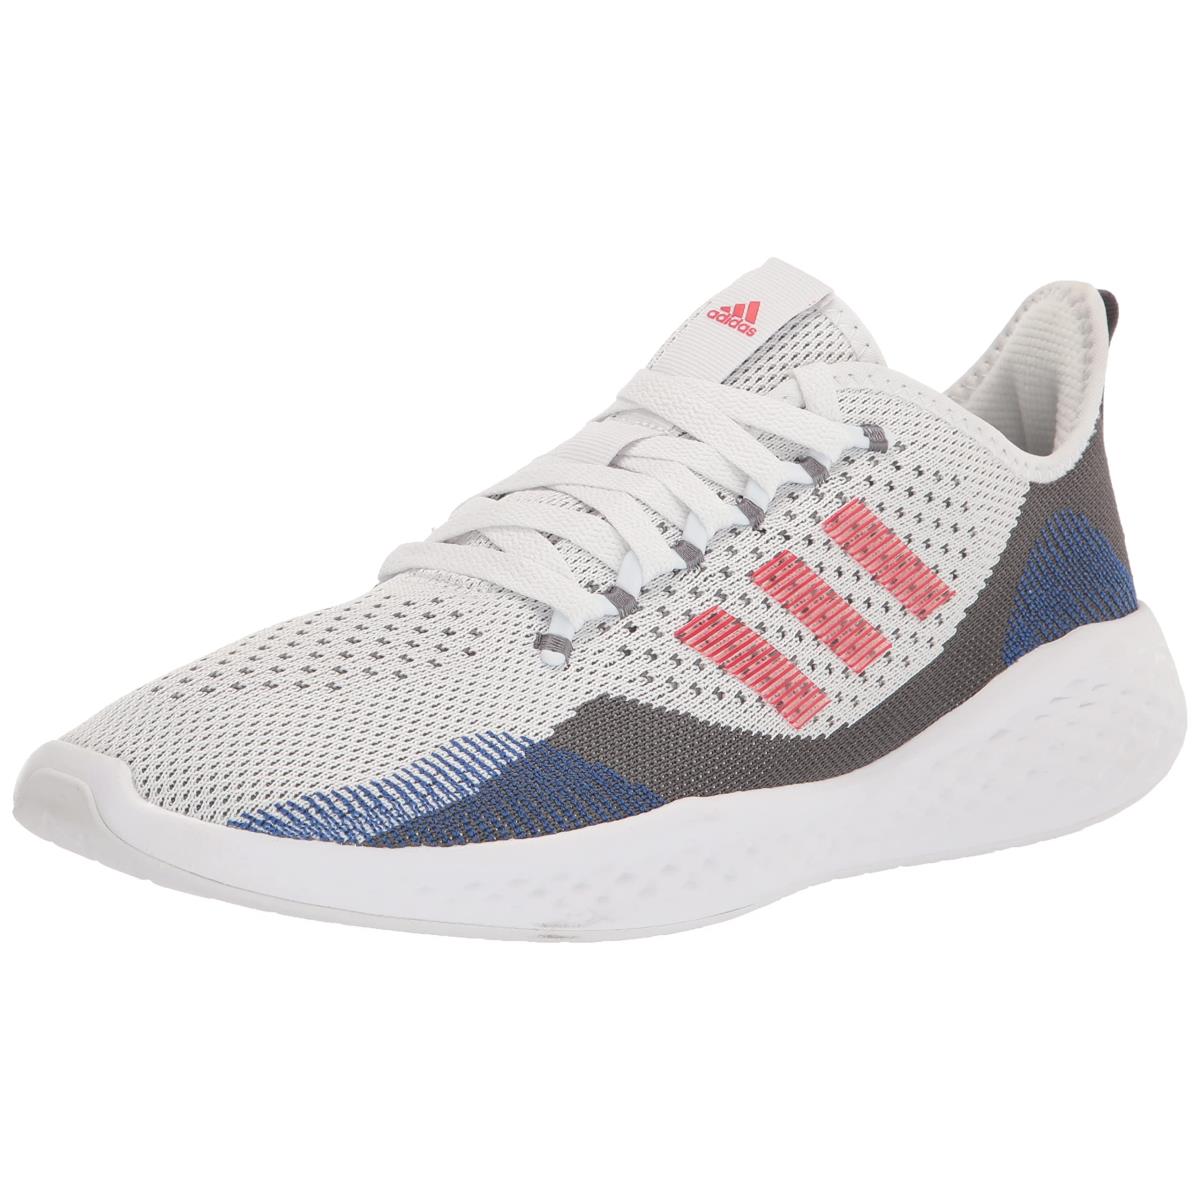 Adidas Men`s Fluidflow 2.0 Shoes Running Ftwr White/Vivid Red/Grey Five